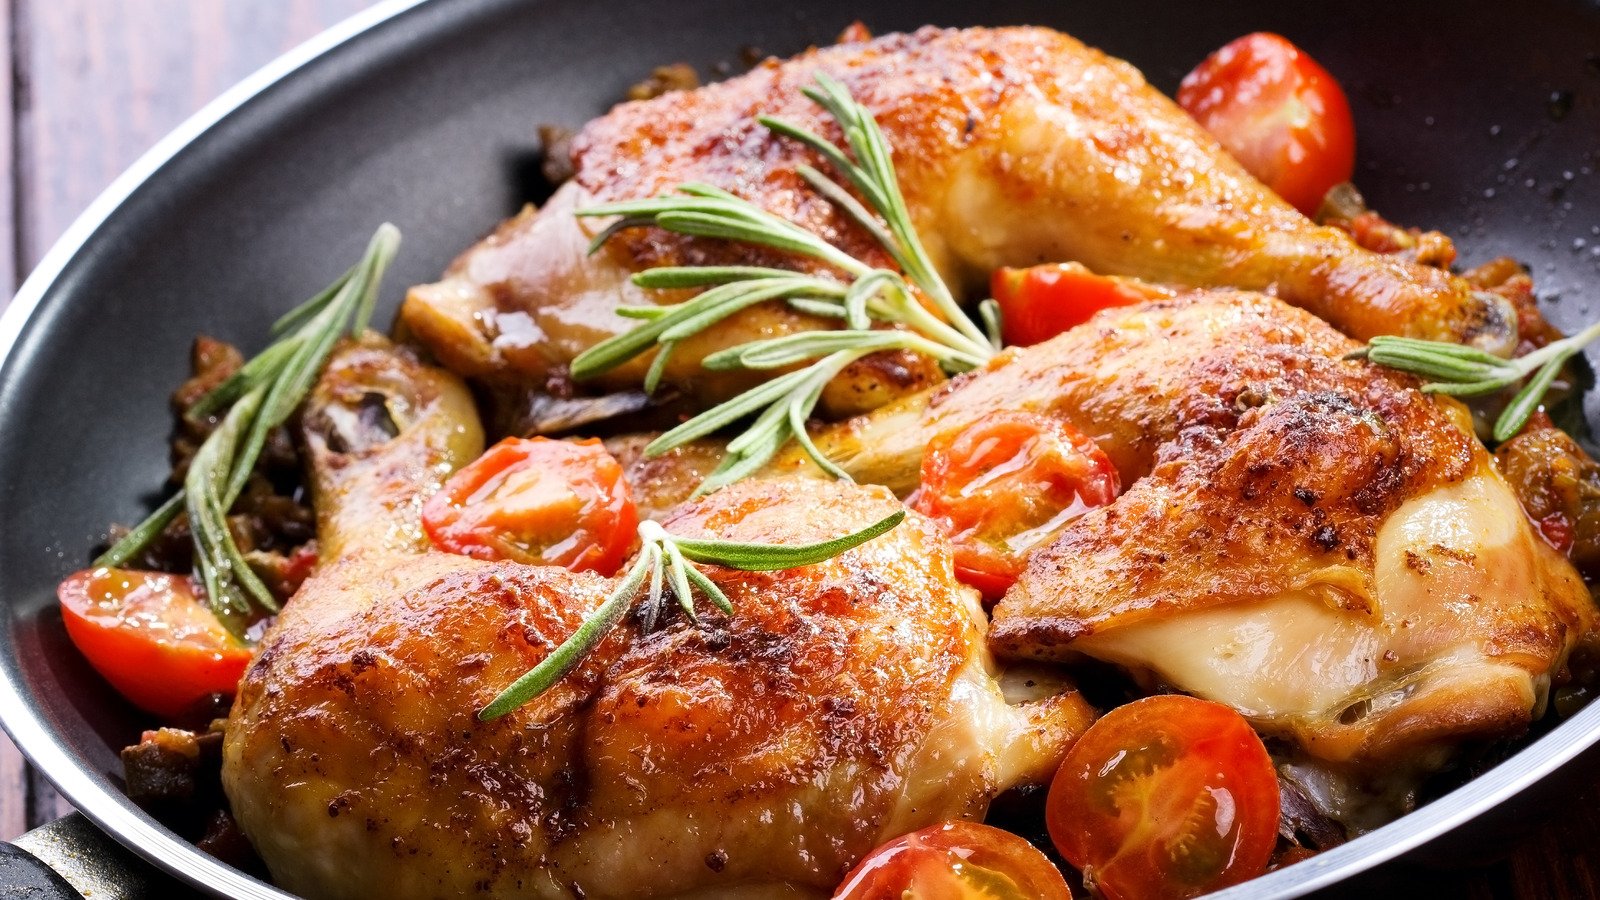 12 Myths About Cooking Chicken You Should Stop Believing